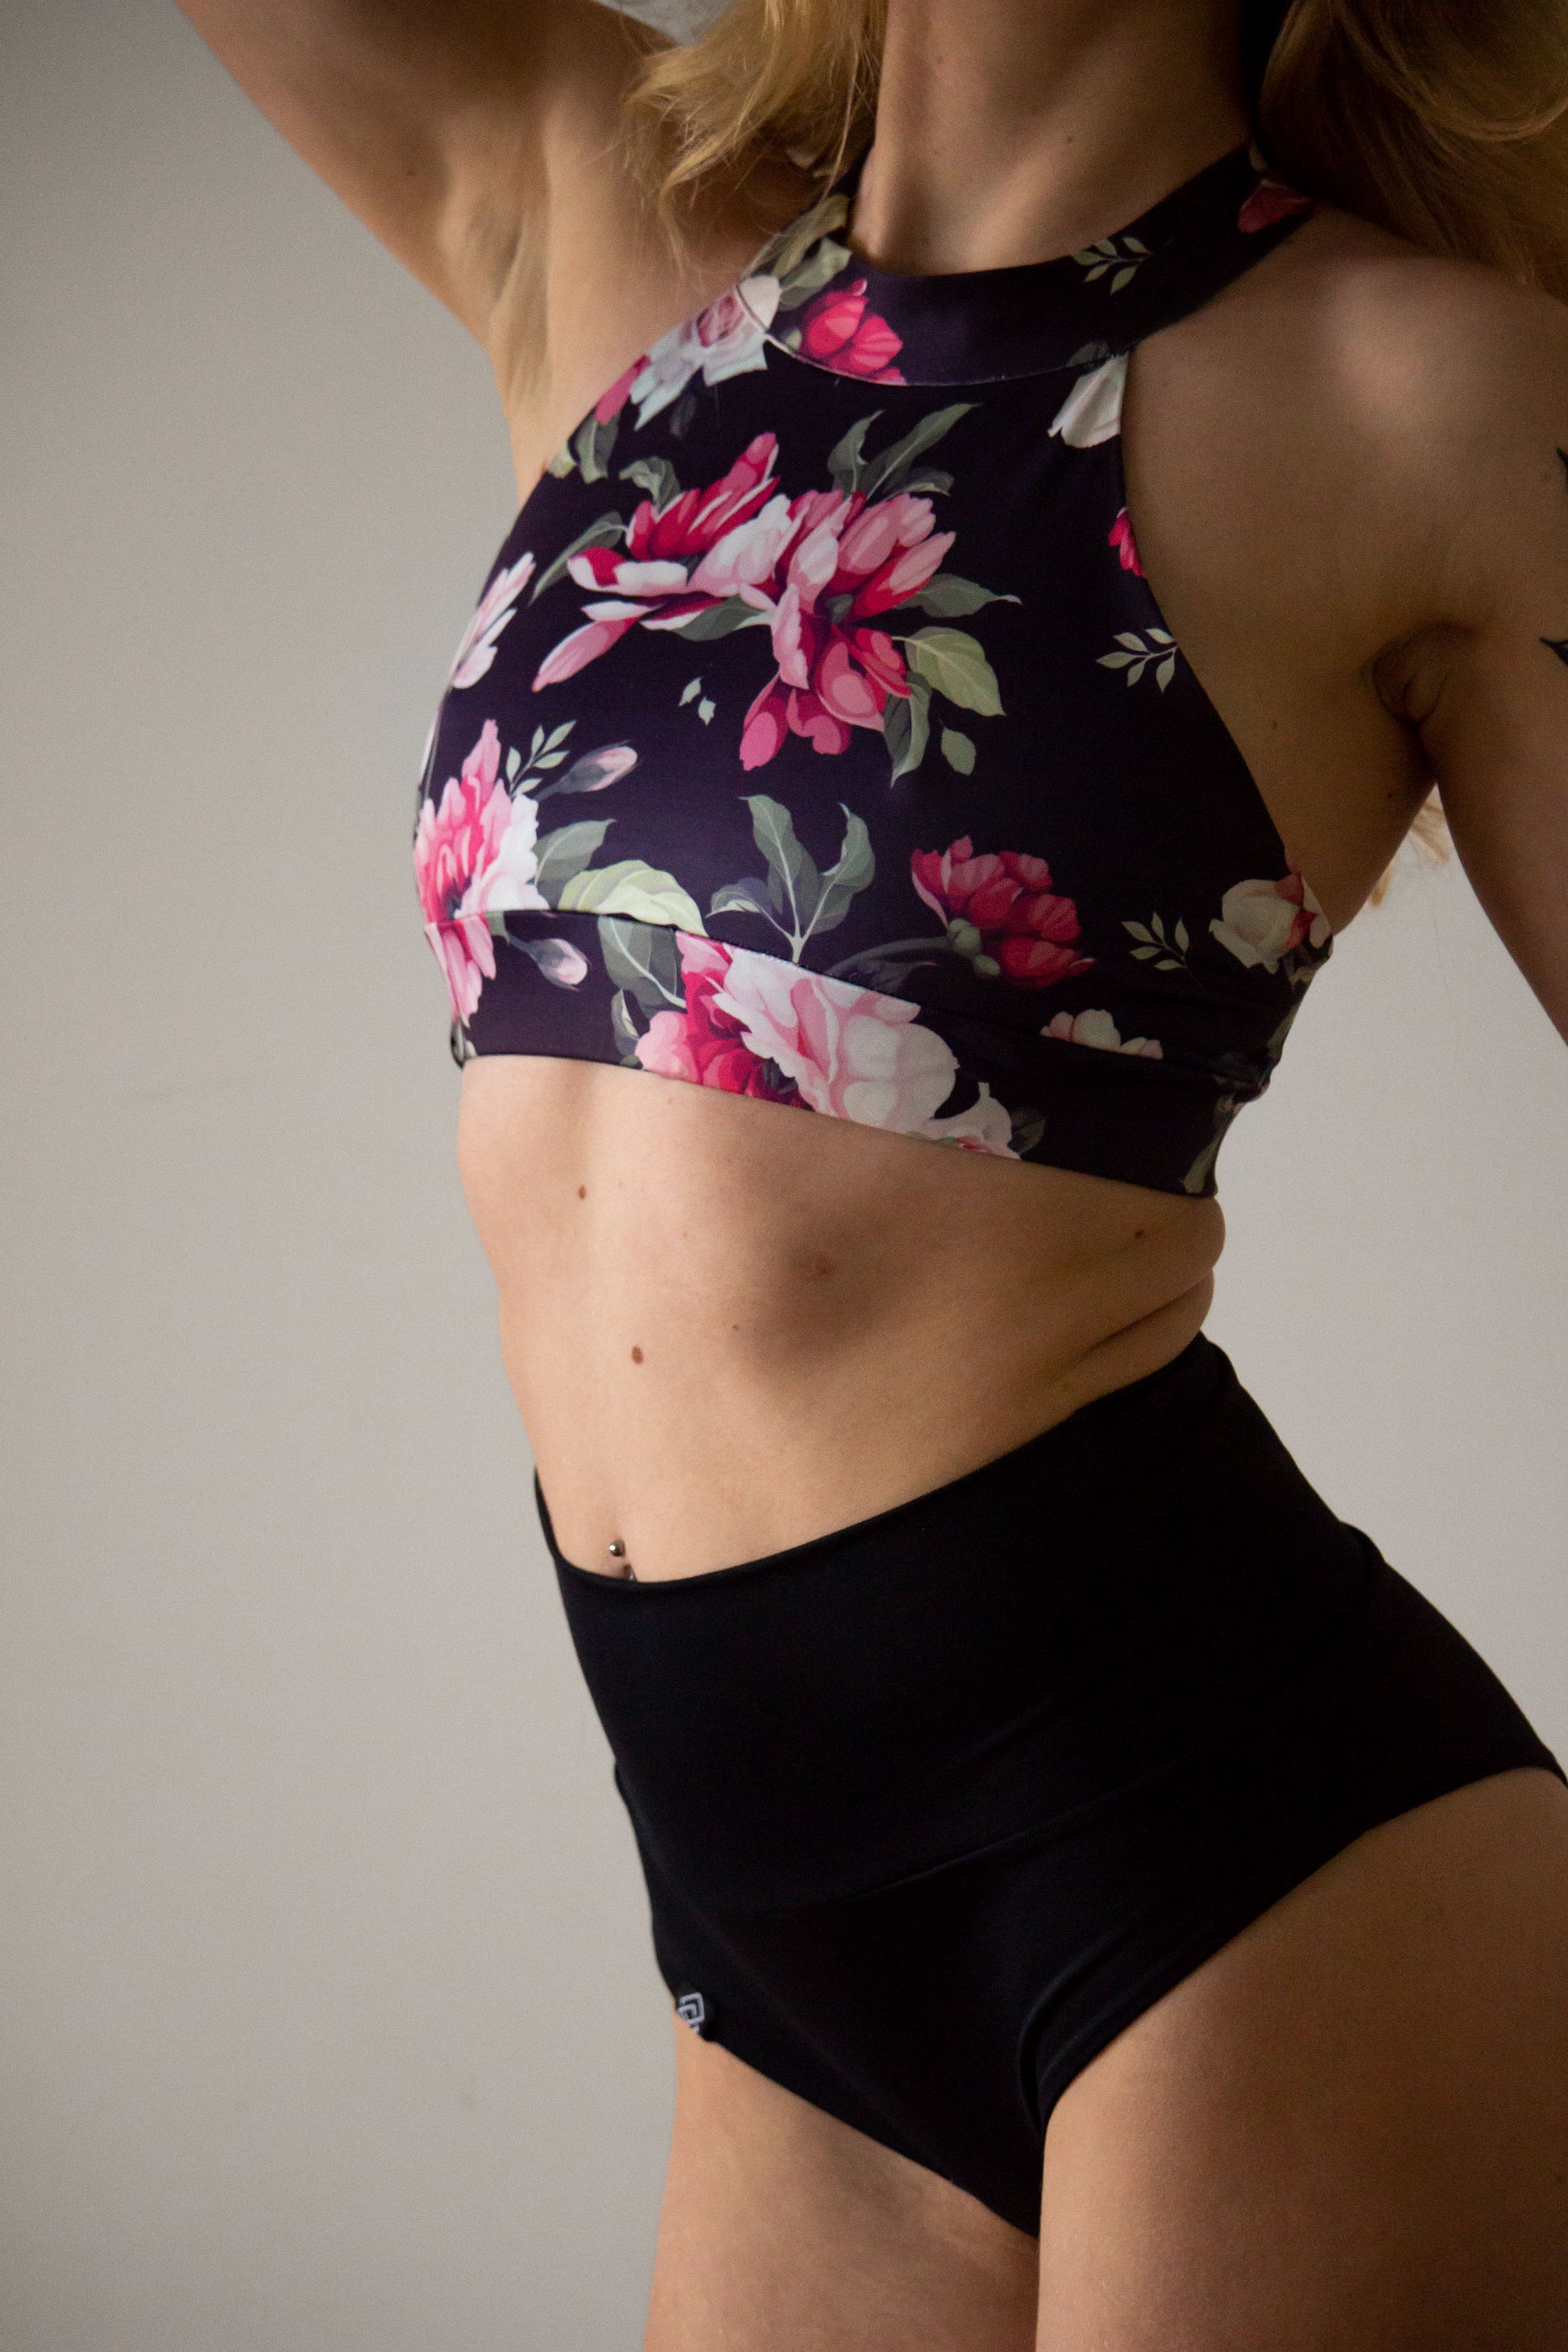 Halter sports bra for pole dance in floral print with cross back